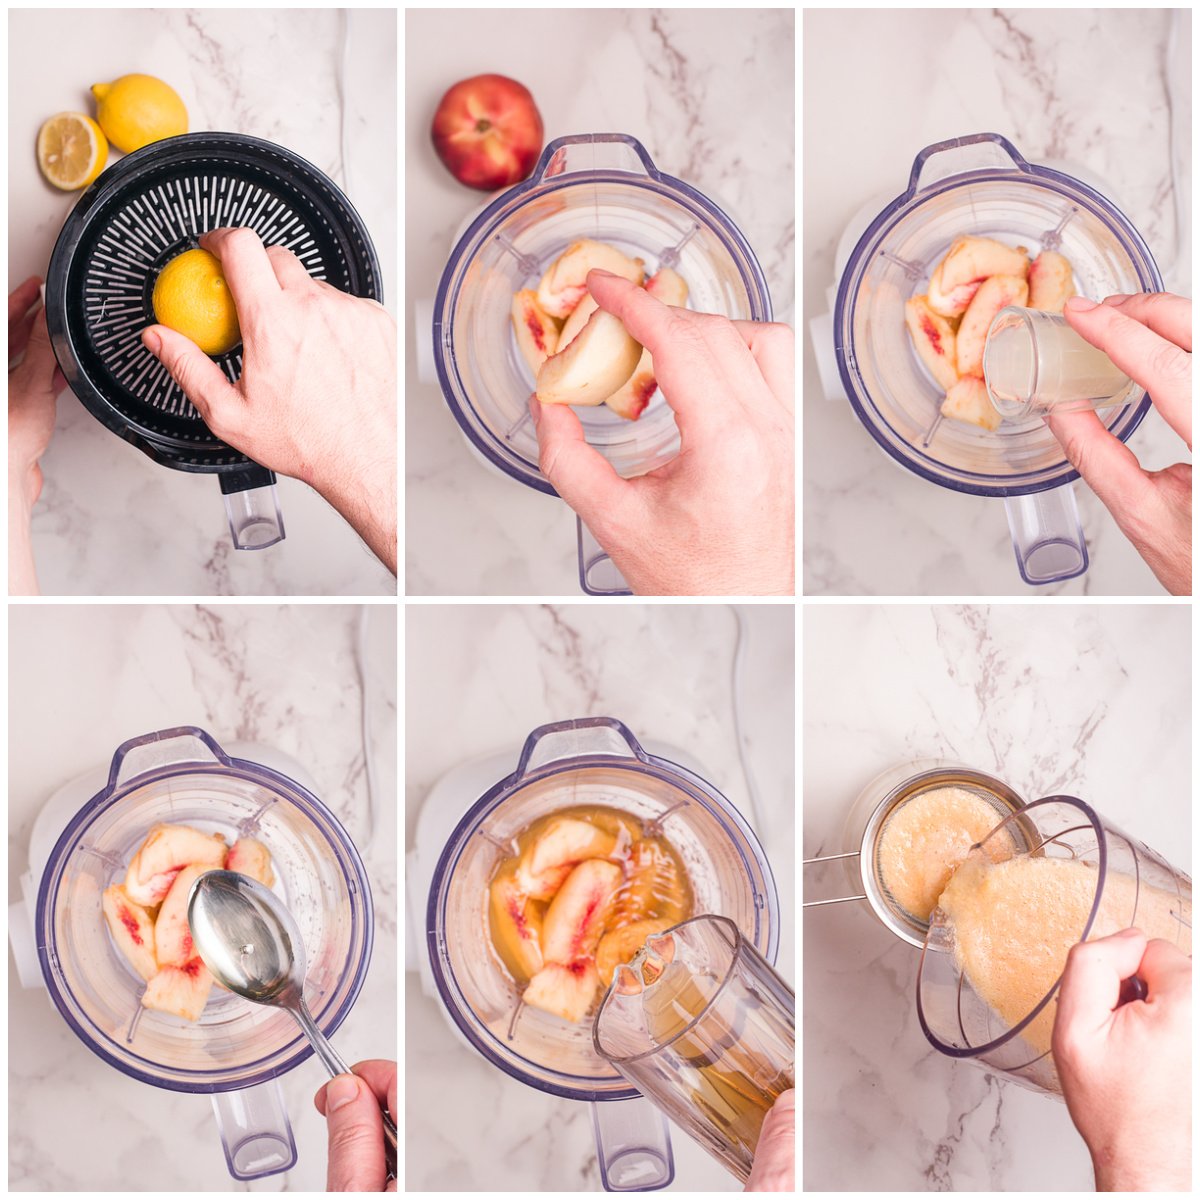 Step by step photos on how to make a Peach Arnold Palmer